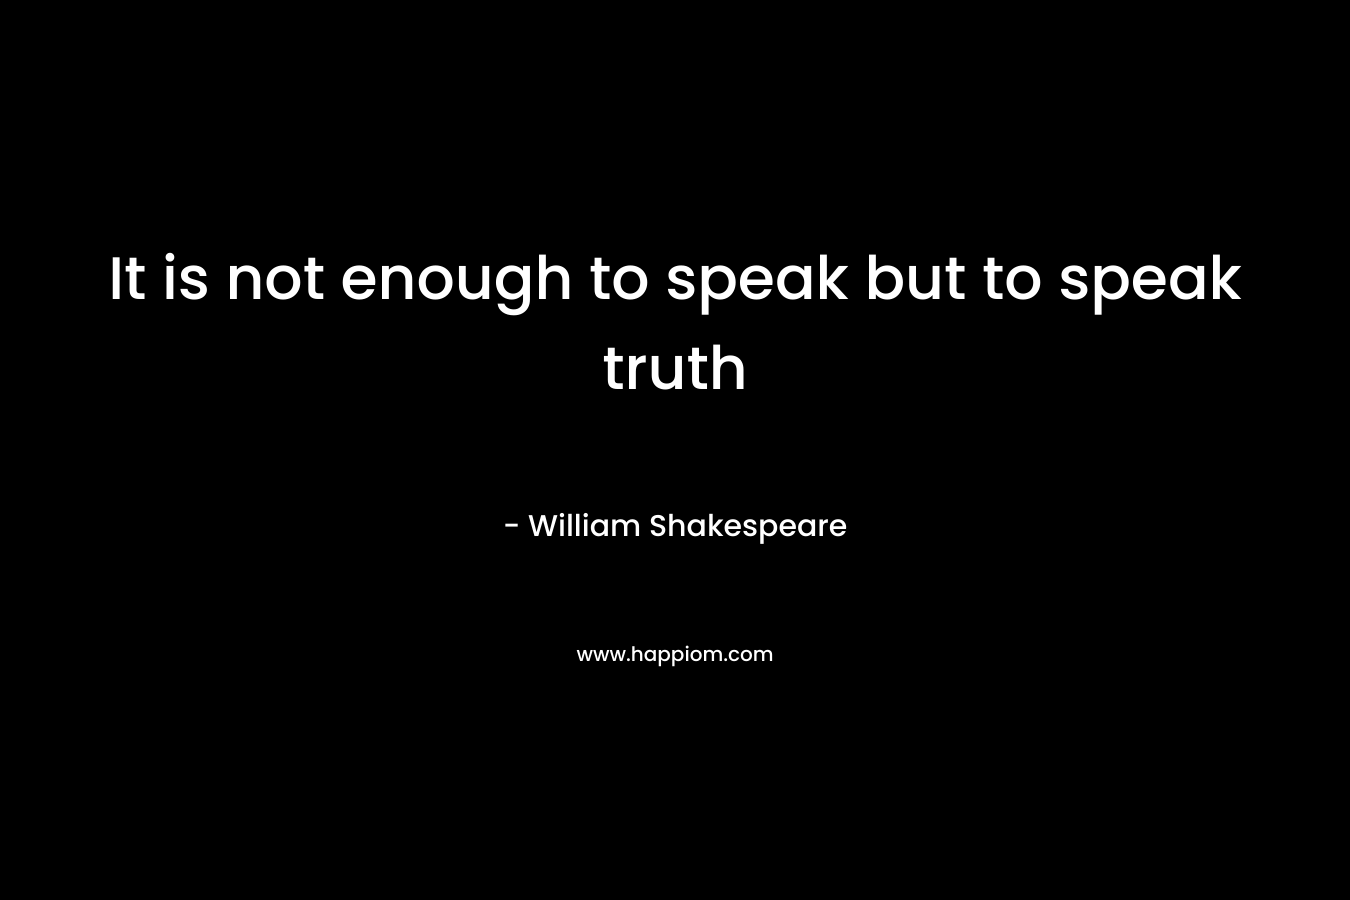 It is not enough to speak but to speak truth